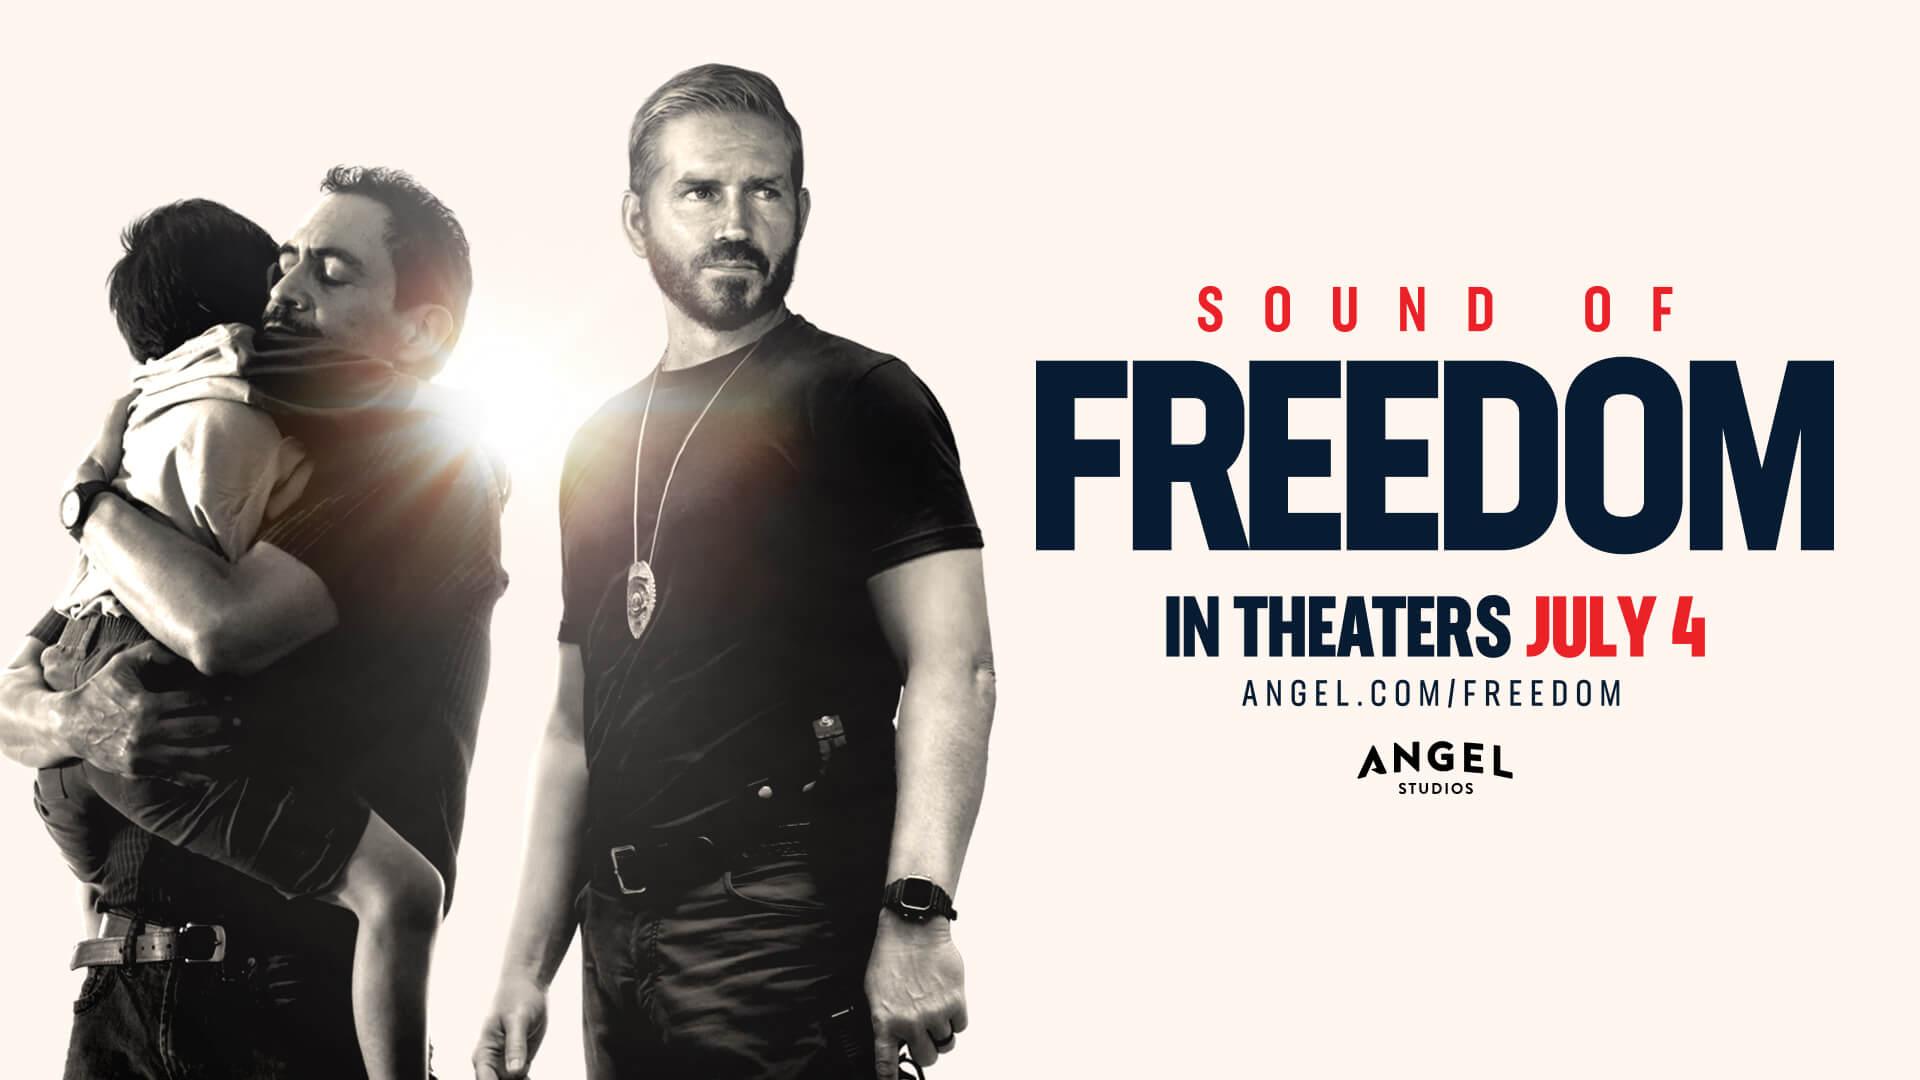 Sound of Freedom Movie 2 Tickets for Free